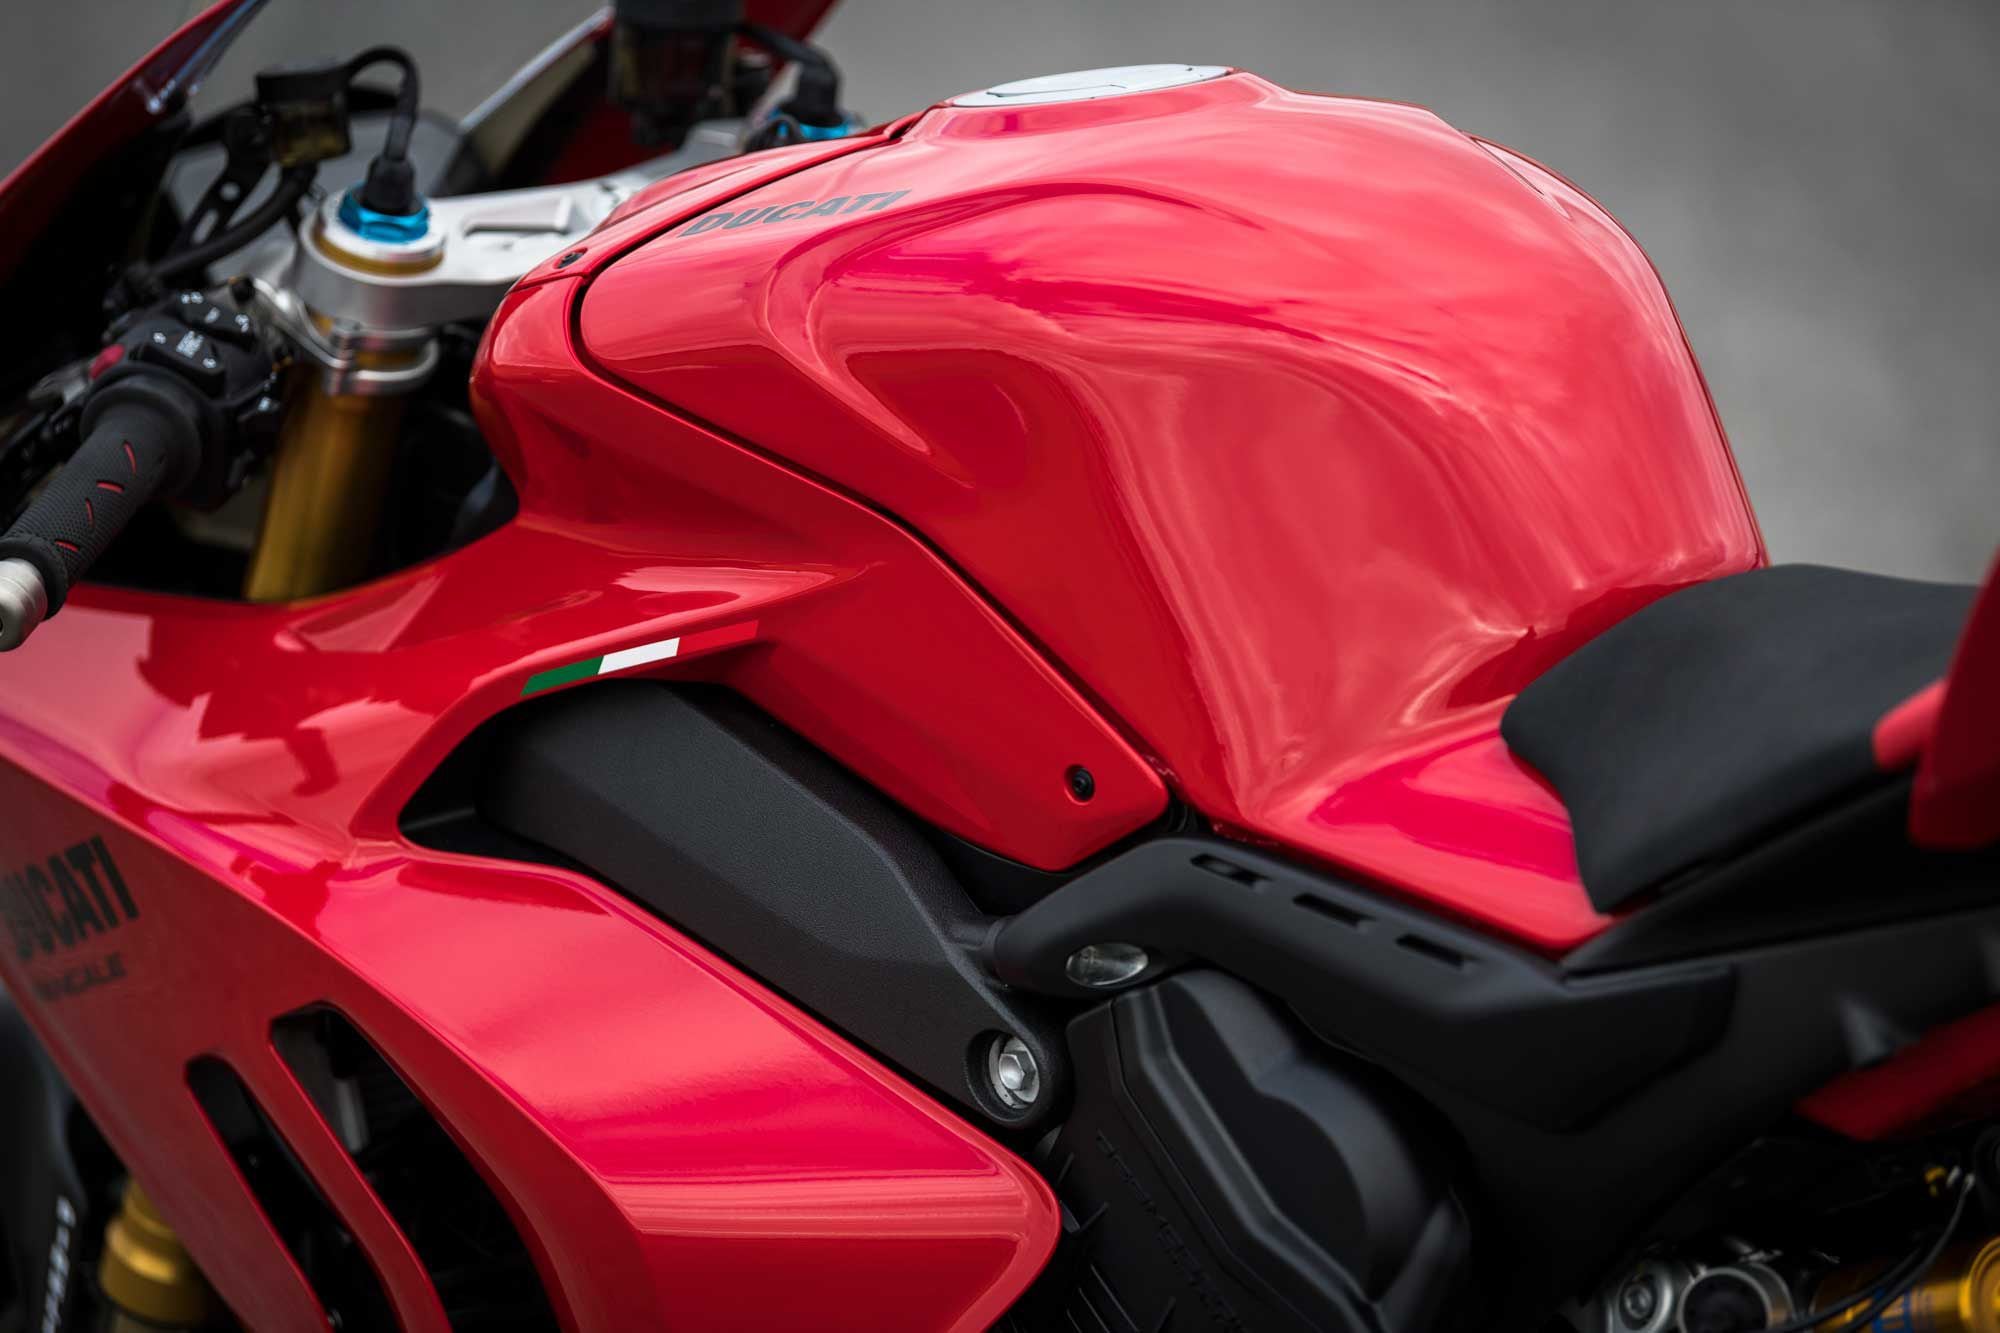 The rear portion of the fuel tank features a more vertical shape which makes it easier for the rider to squeeze with his or her knees.